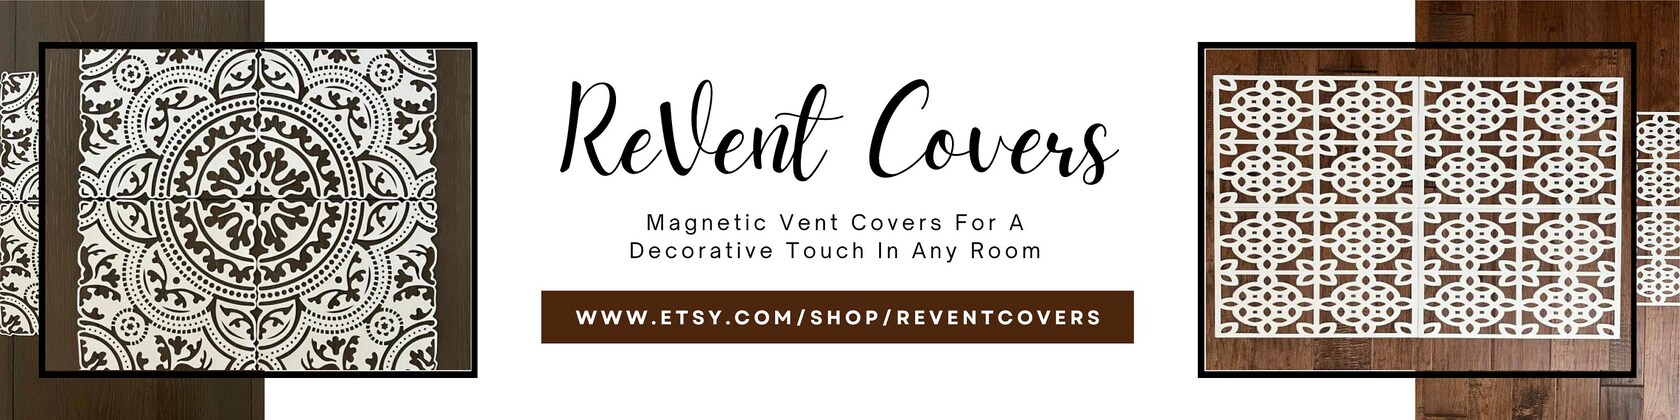 Revent Covers 